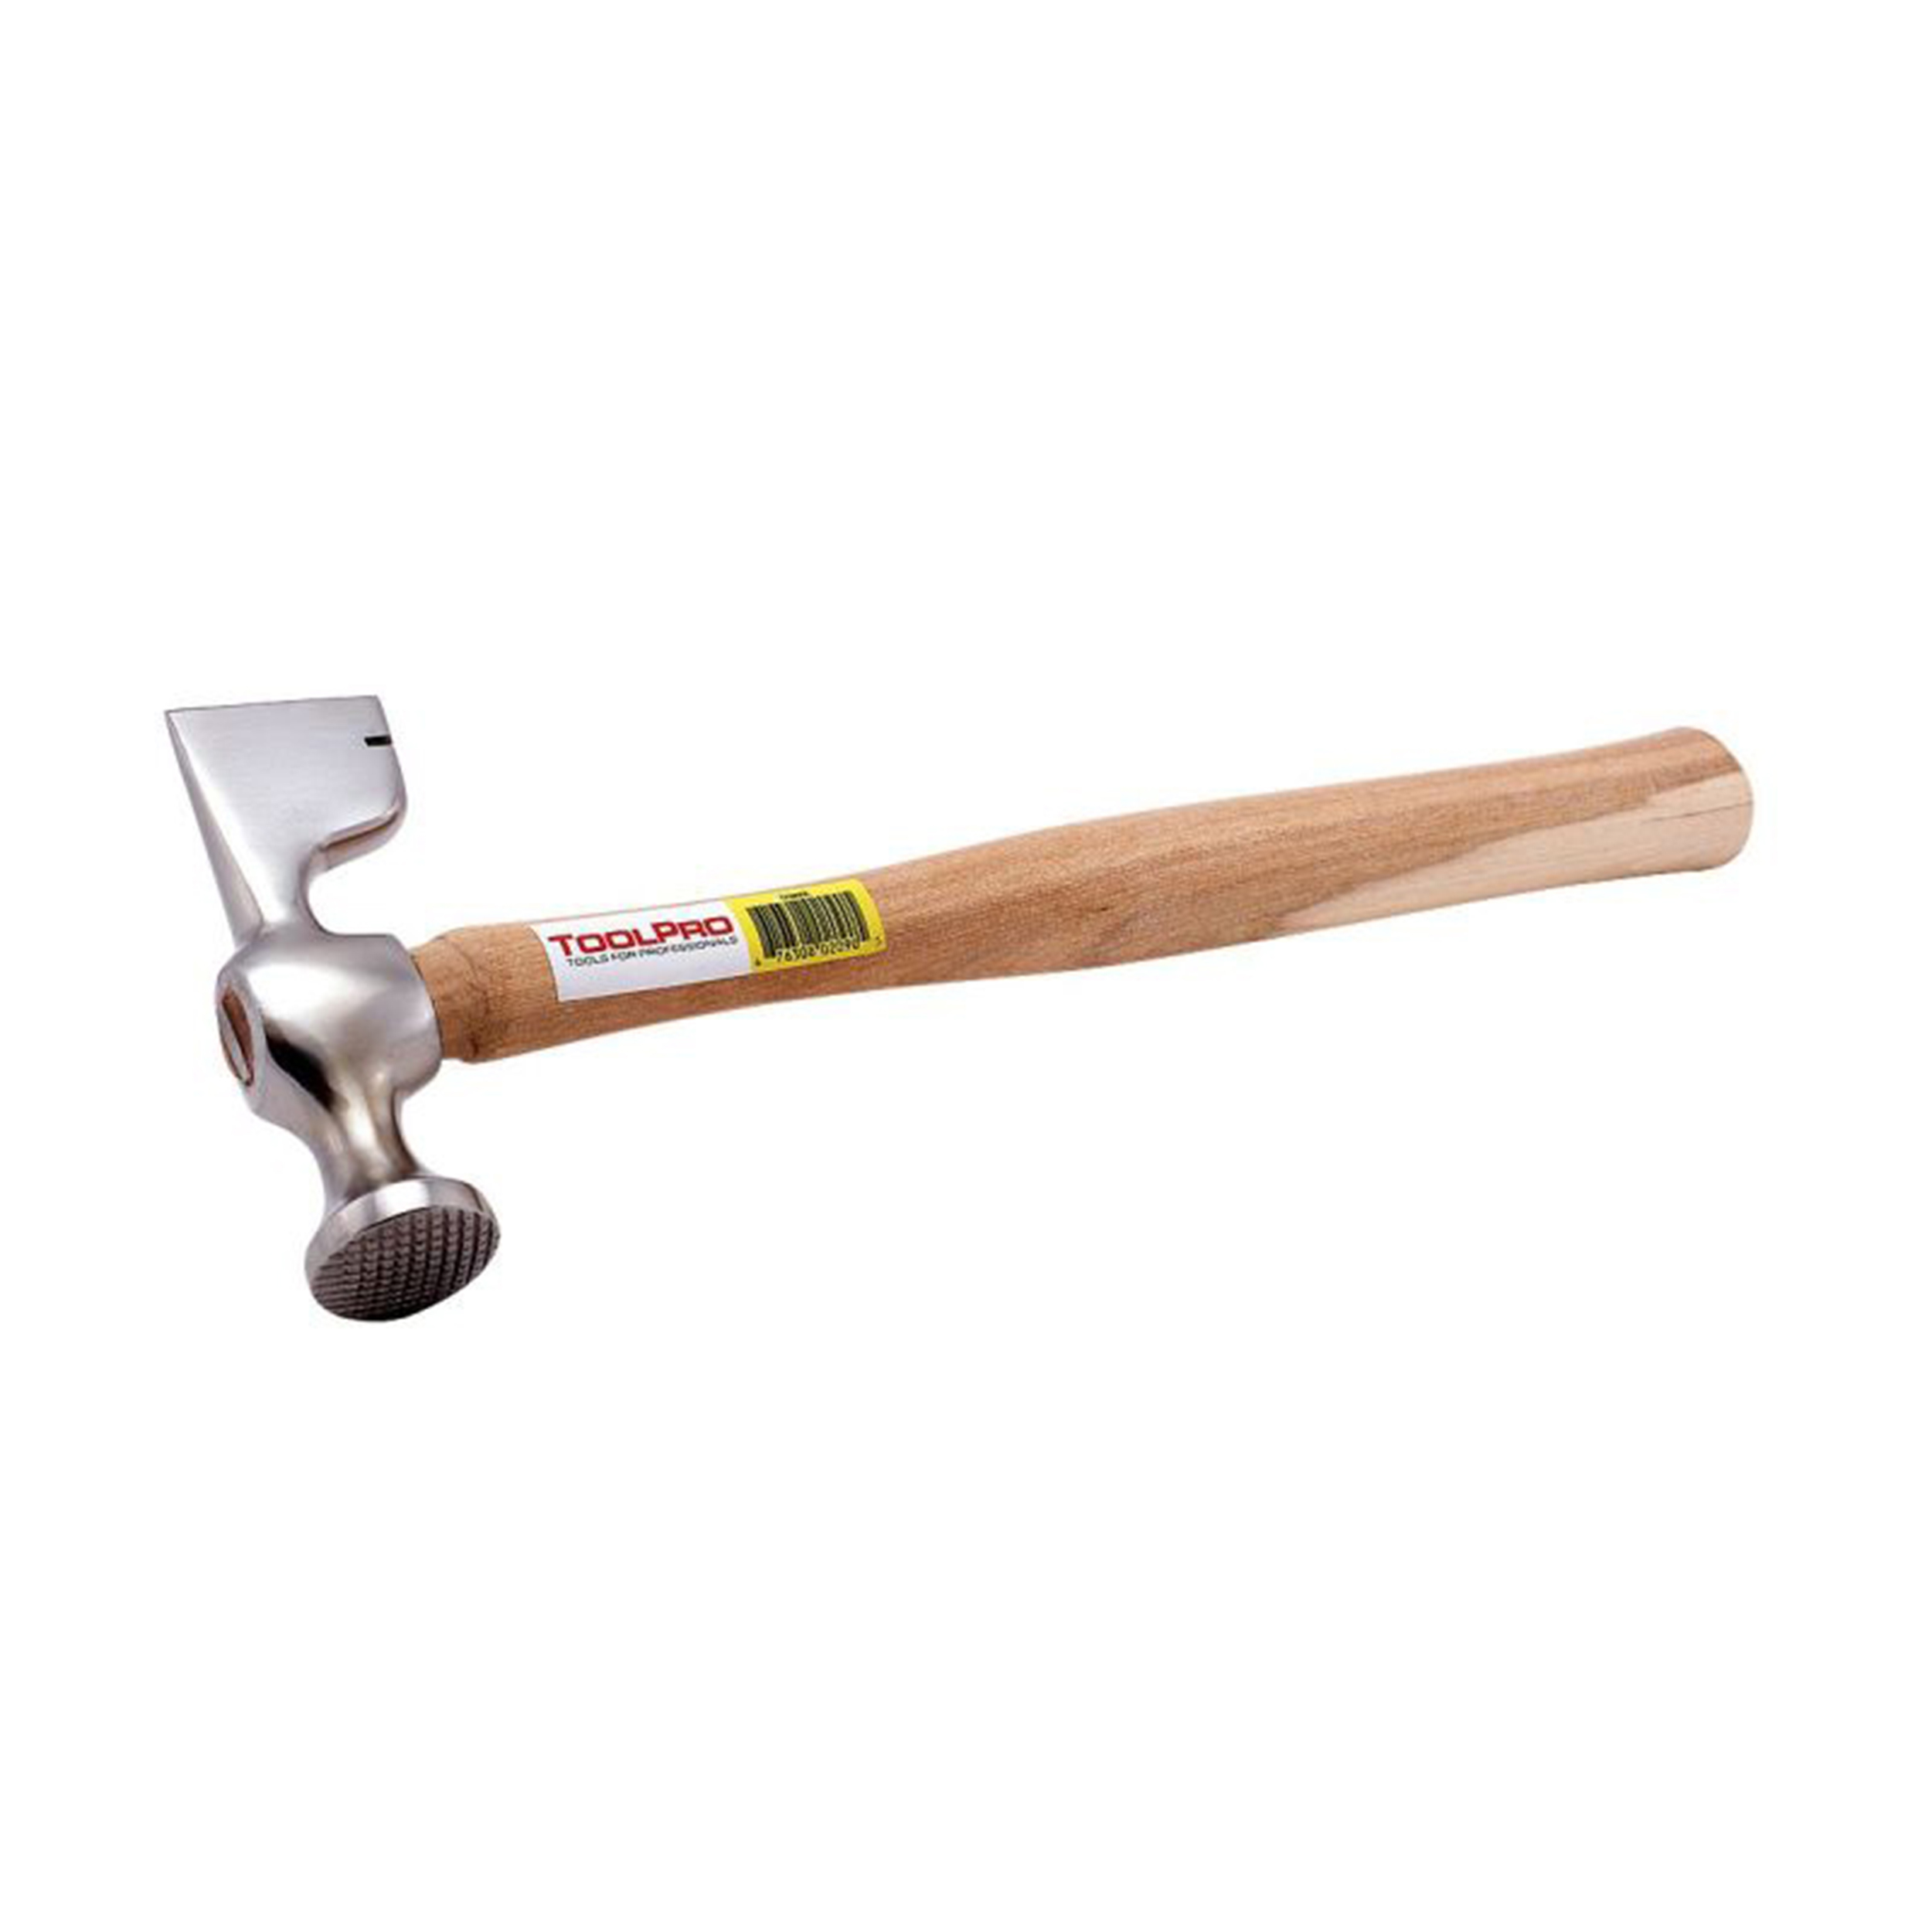 Drywall Hammer With 12oz. Head And 14" Handle